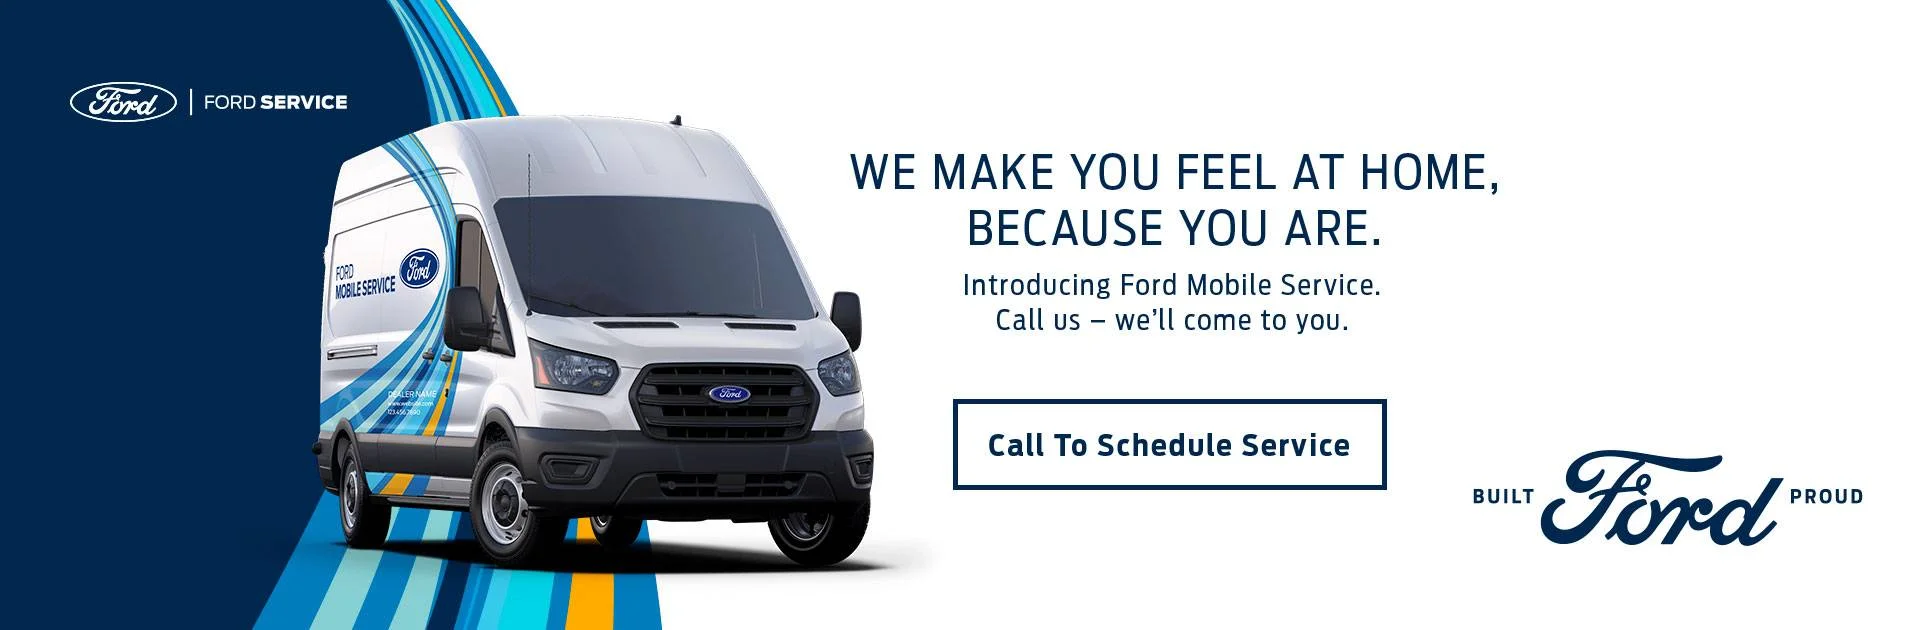 We make you feel at home, because you are. Introducing Ford Mobile Service. Call us - we'll come to you. Call to Schedule Service